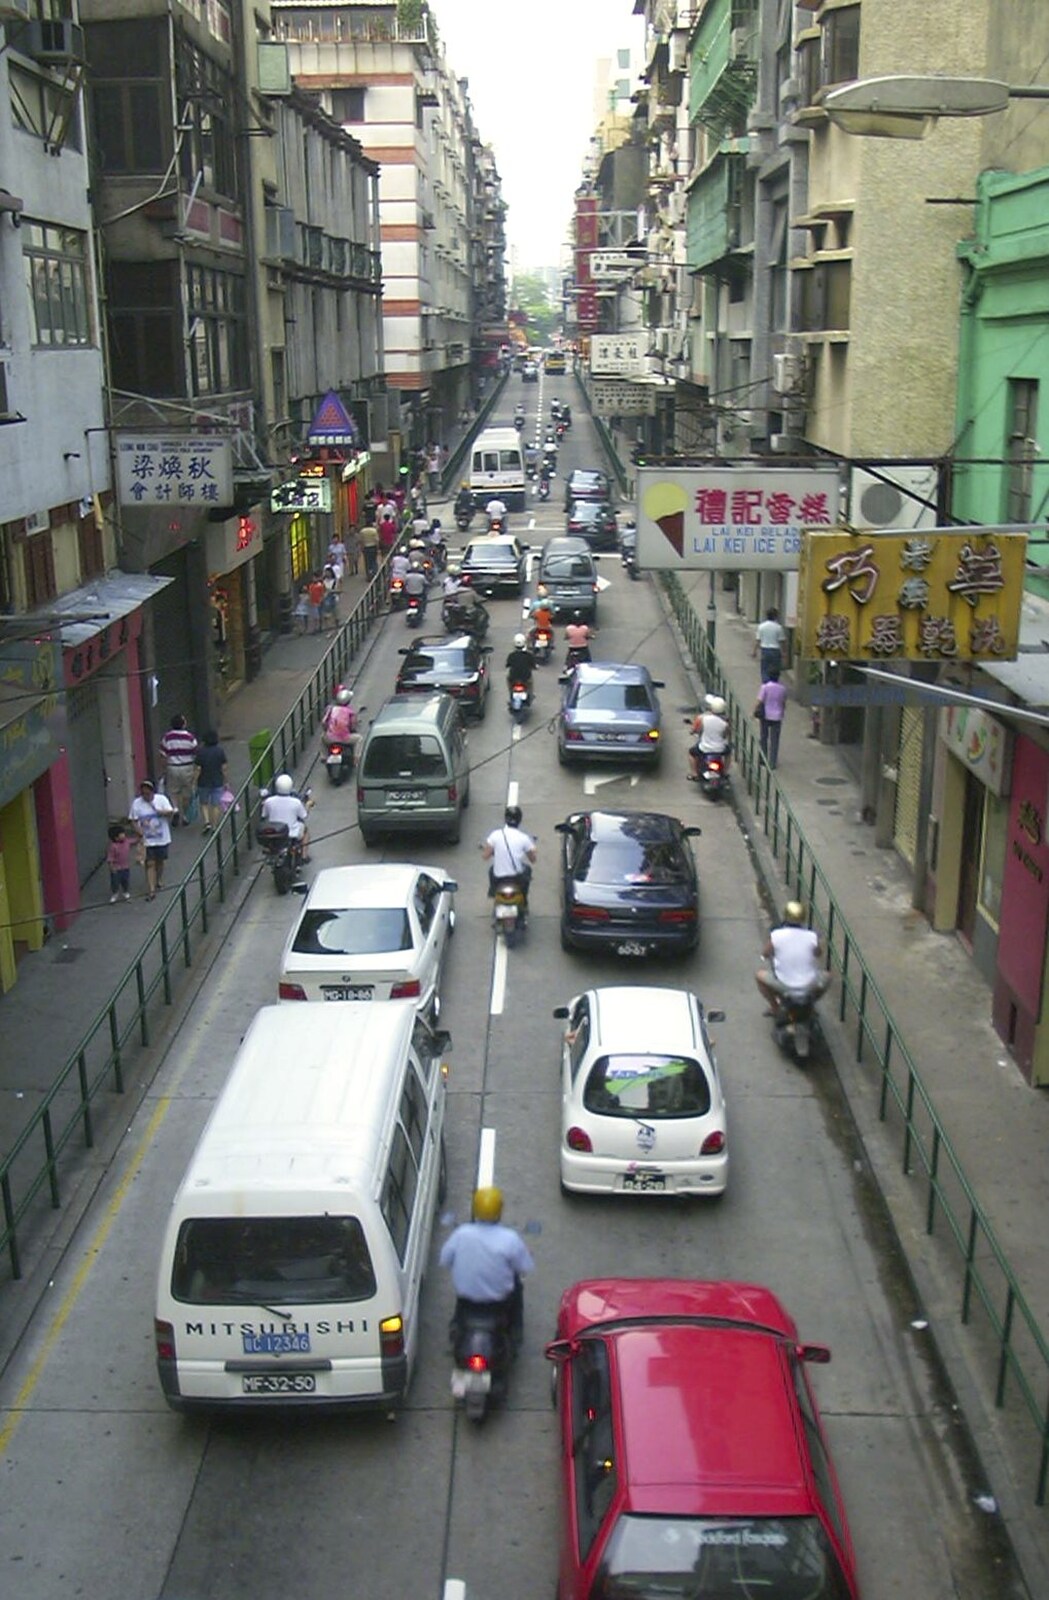 A Day Trip to Macau, China - 16th August 2001: A busy street